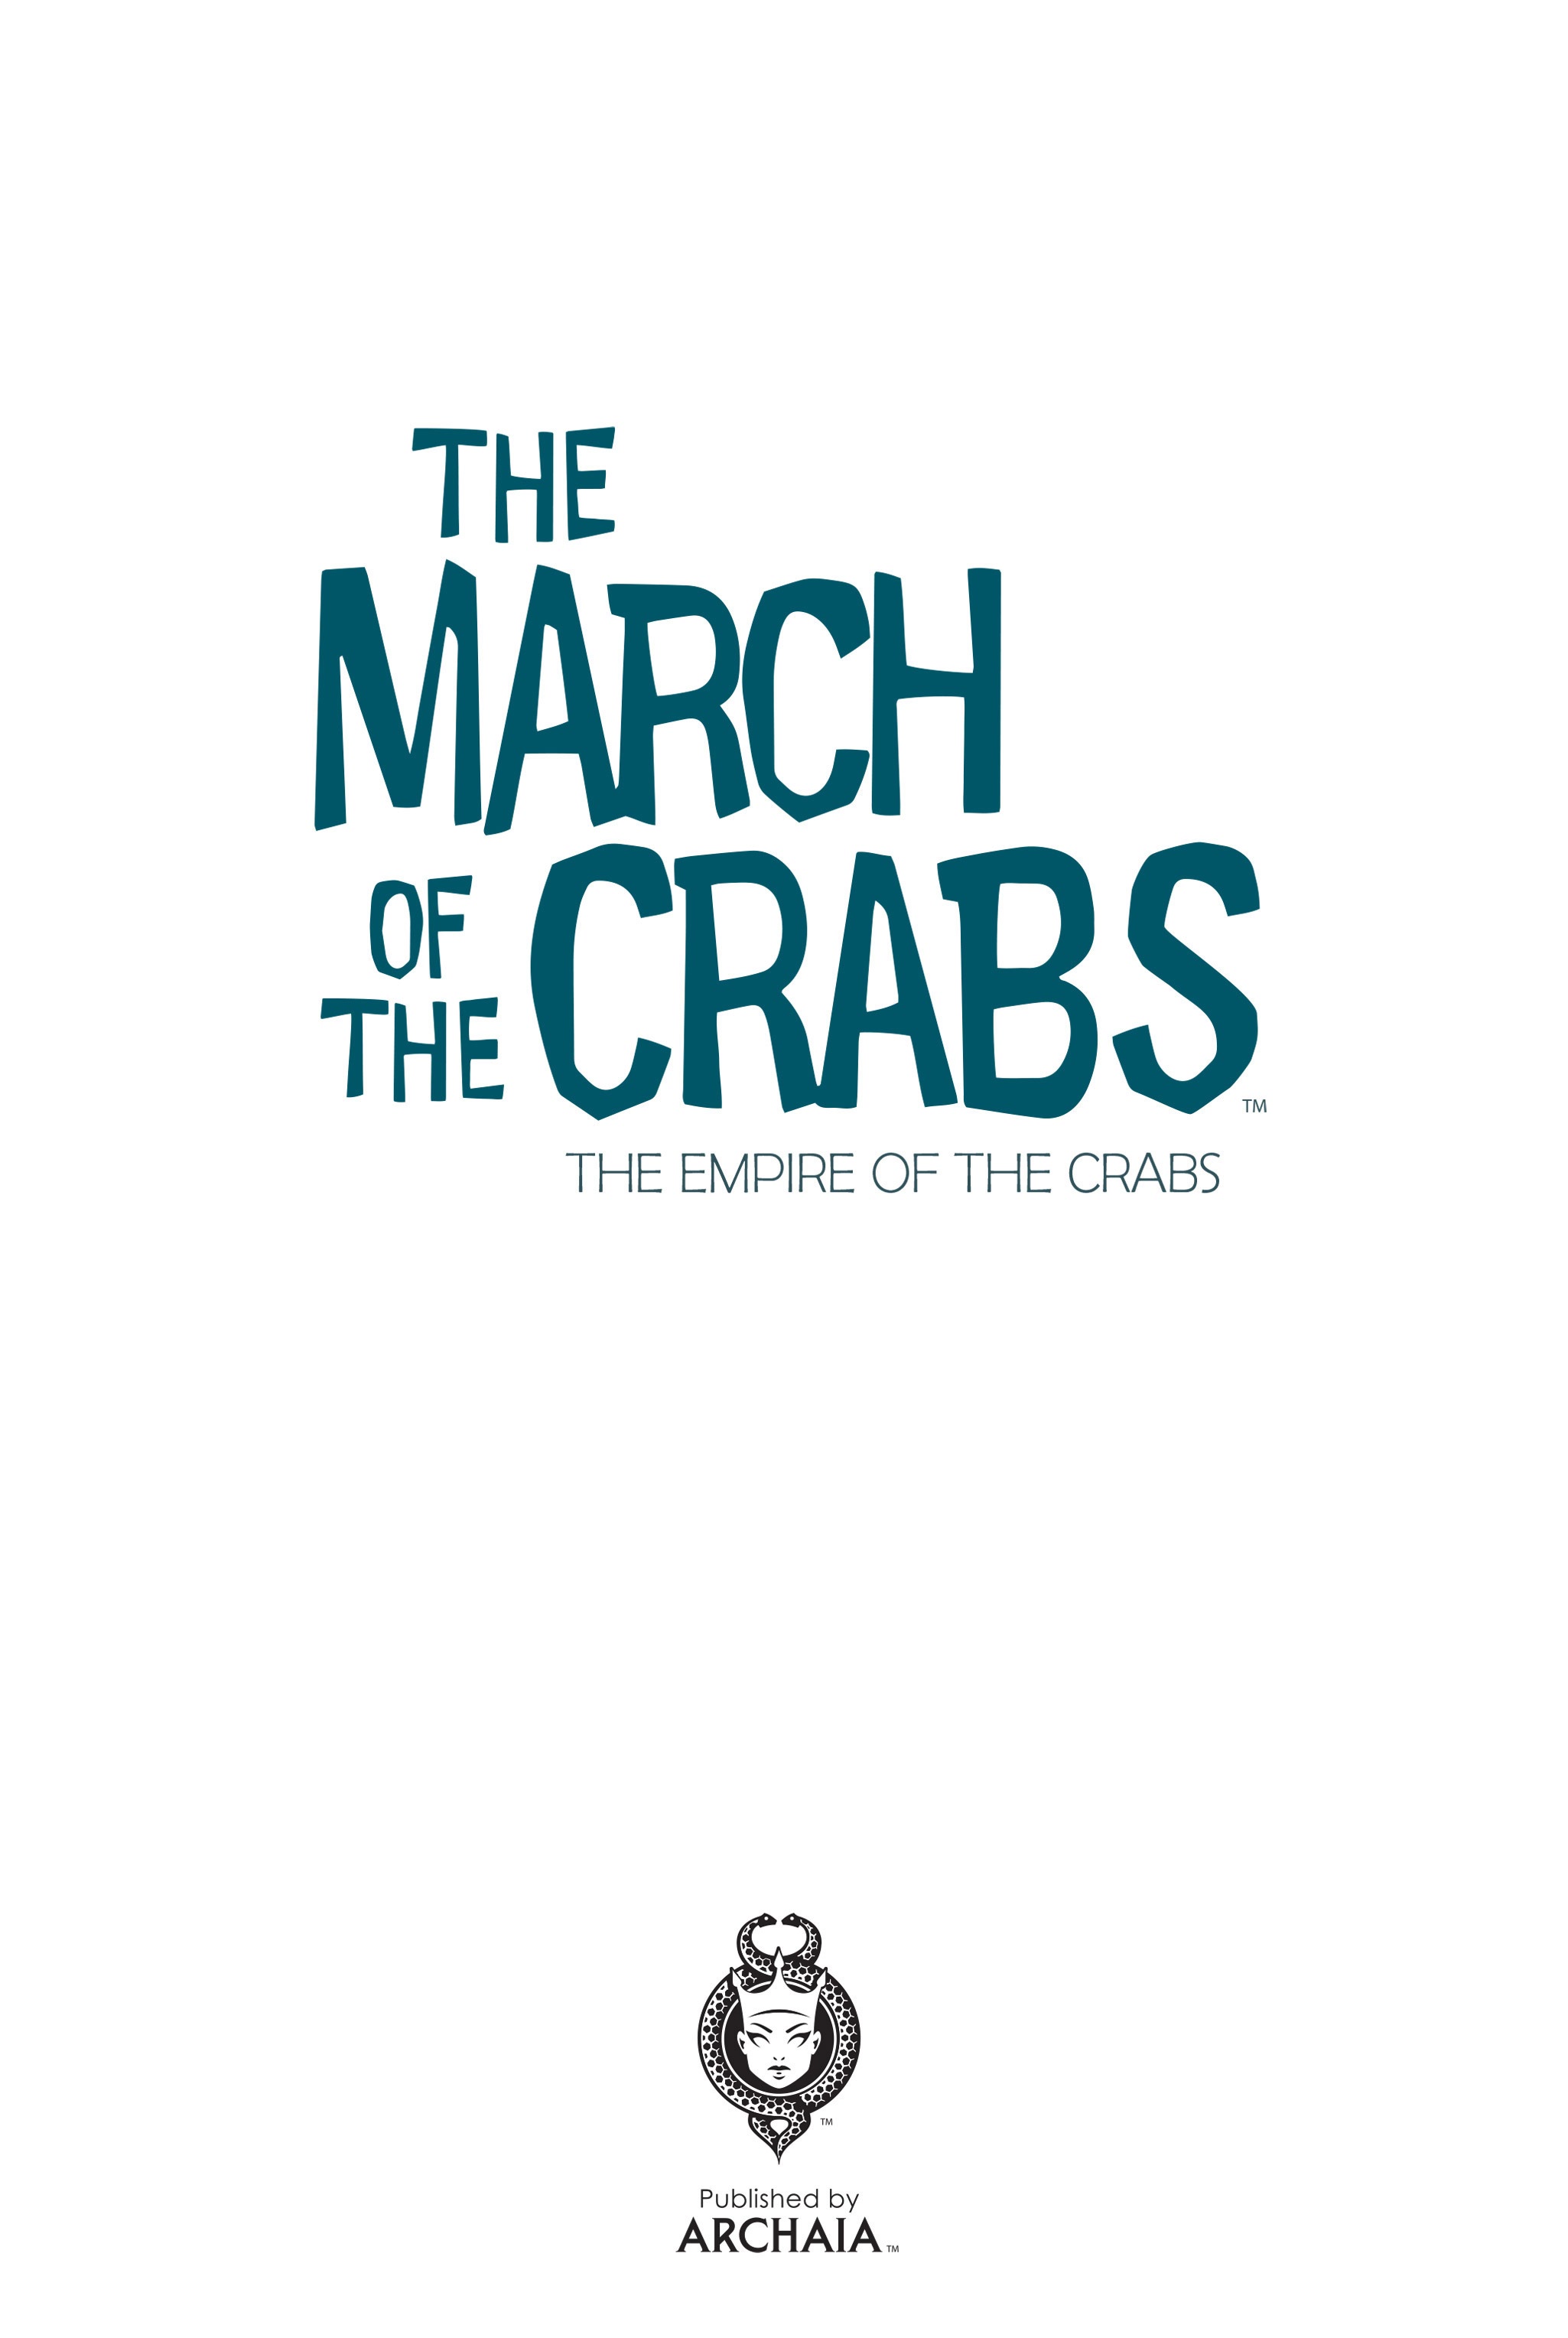 Read online The March of the Crabs comic -  Issue # TPB 2 - 2